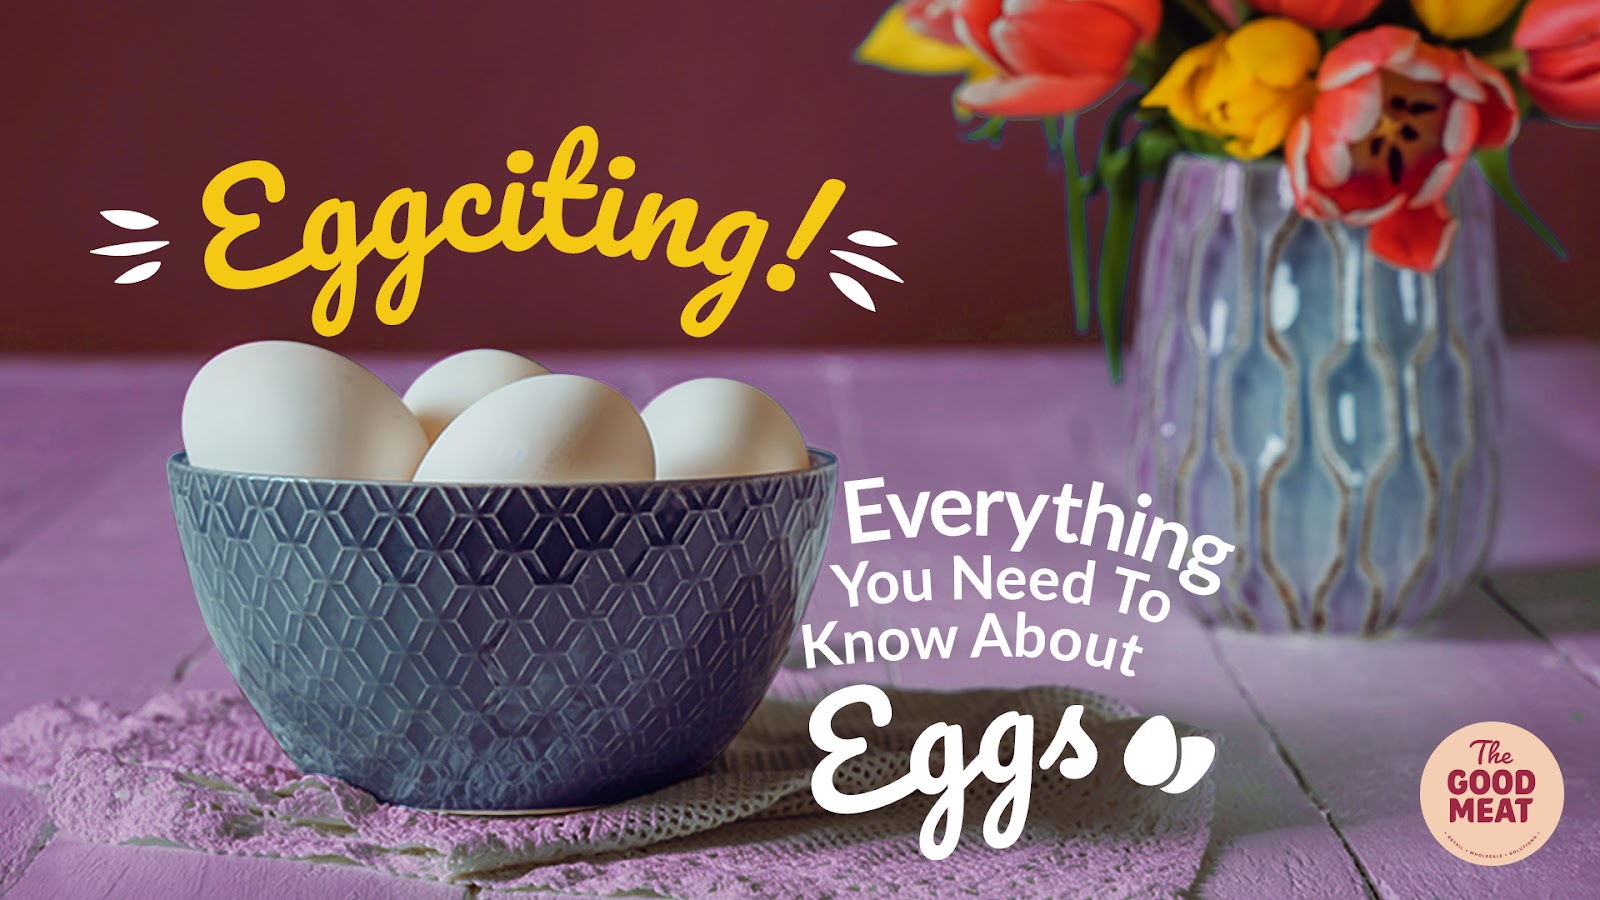 Eggciting! Everything You Need To Know About Eggs